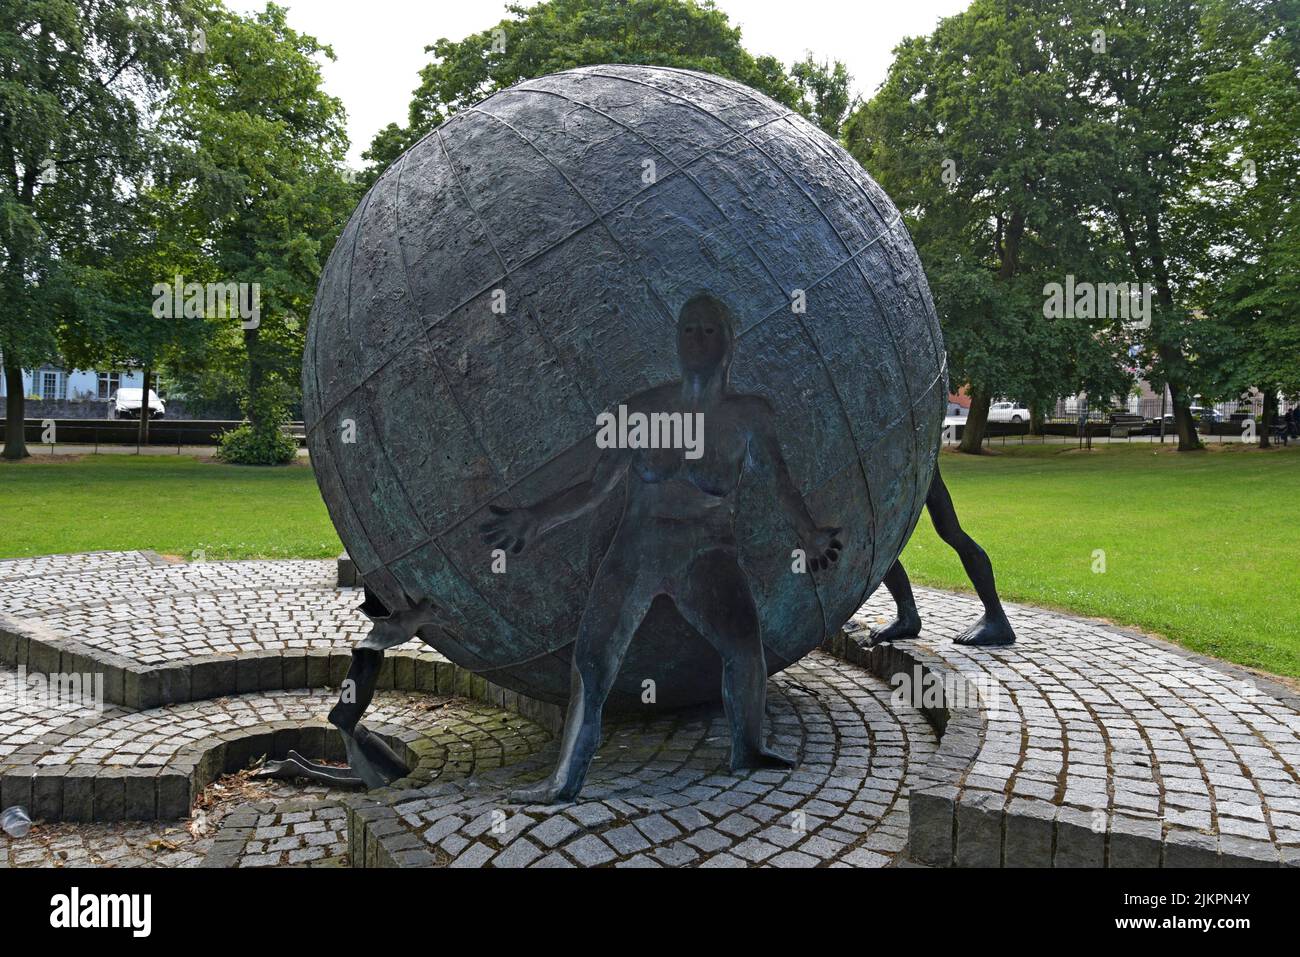 A large bronze sculpture called “Turning Point” by Brian Connolly, The Mall, Armagh, Northern Ireland, July 2022 Stock Photo